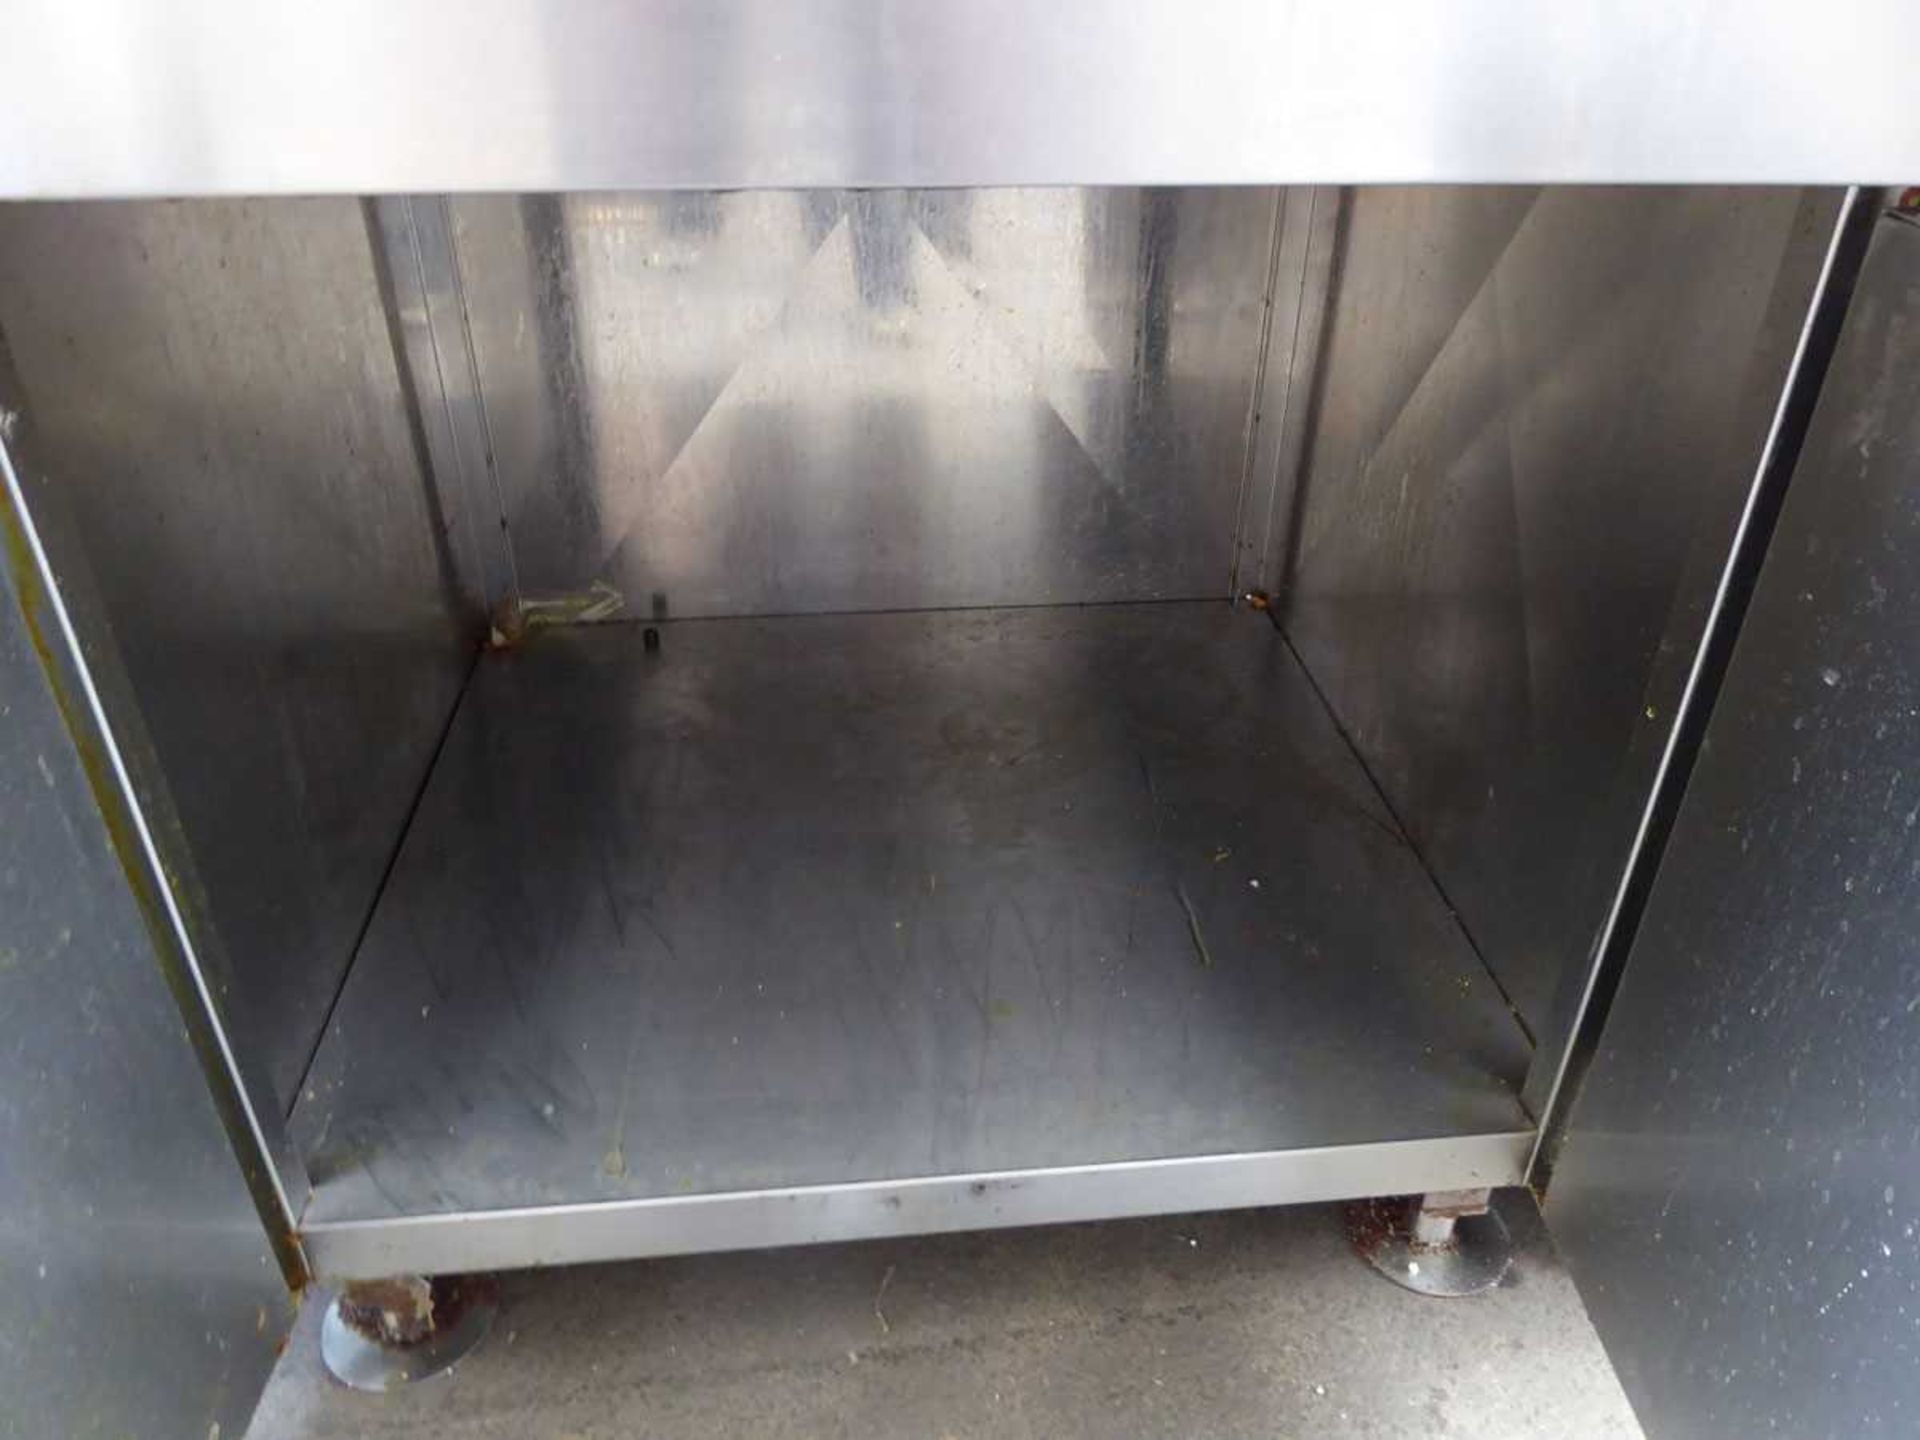 66cm electric Prodis twin tank fryer with 2 baskets - Image 2 of 2